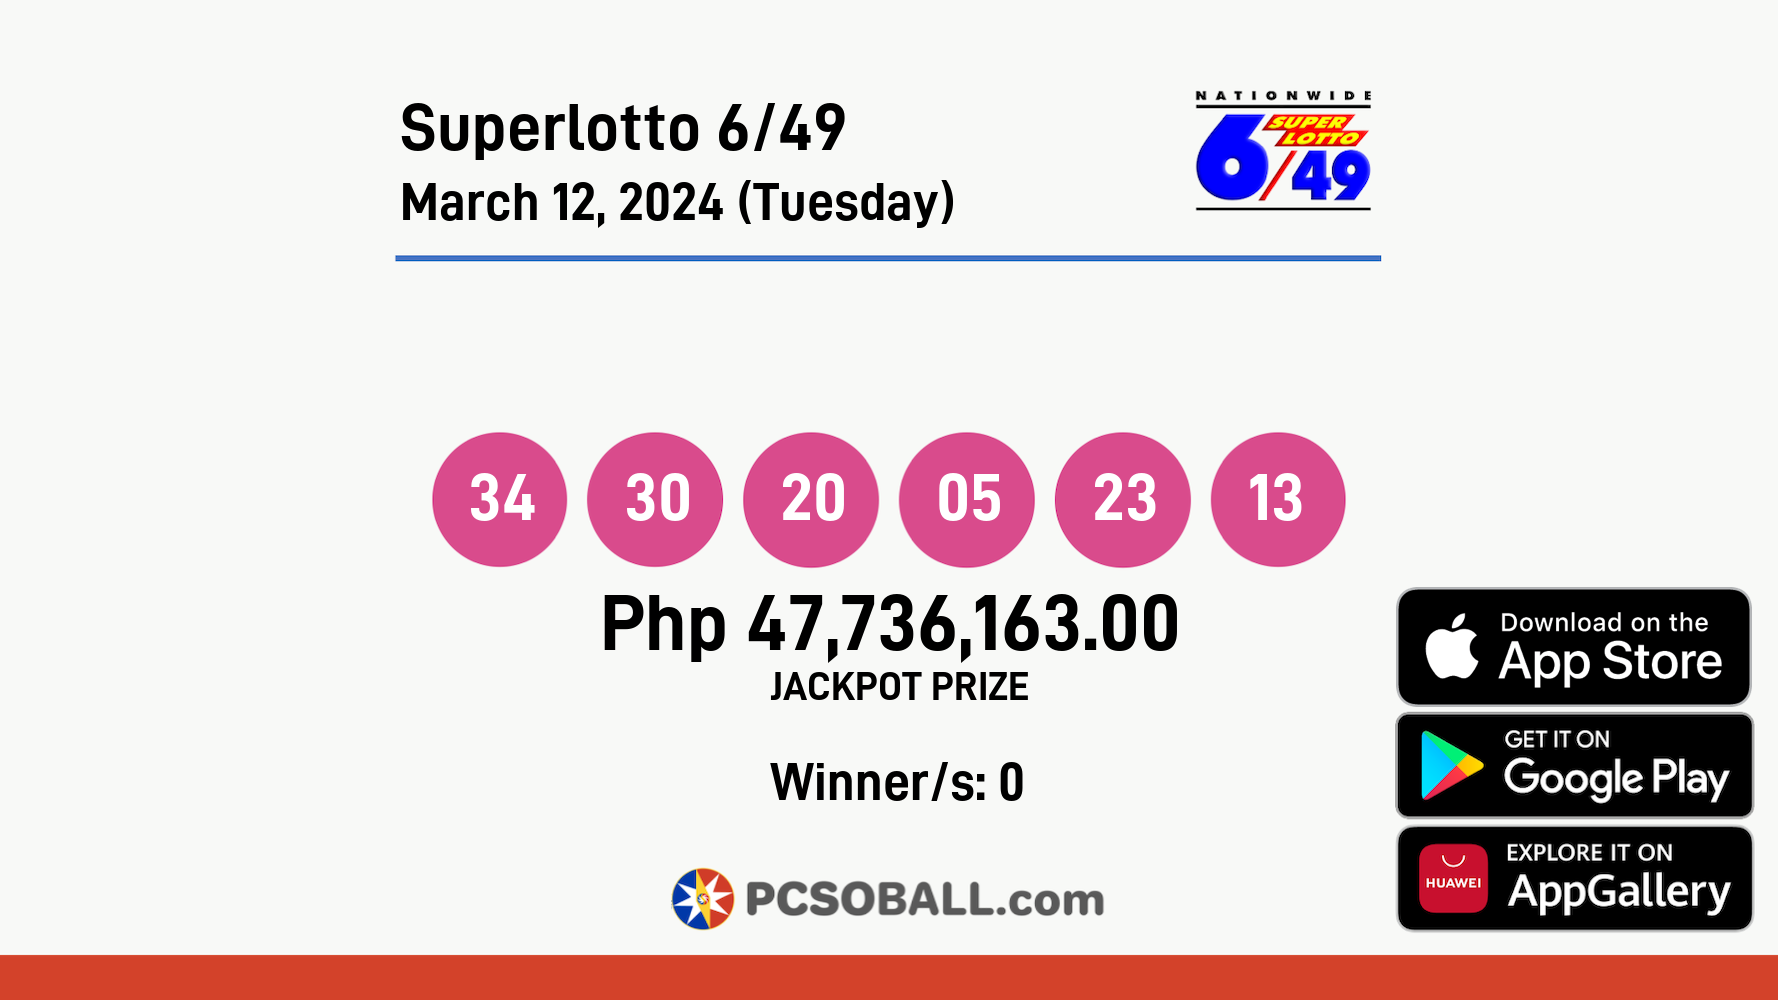 Superlotto 6/49 March 12, 2024 (Tuesday) Result